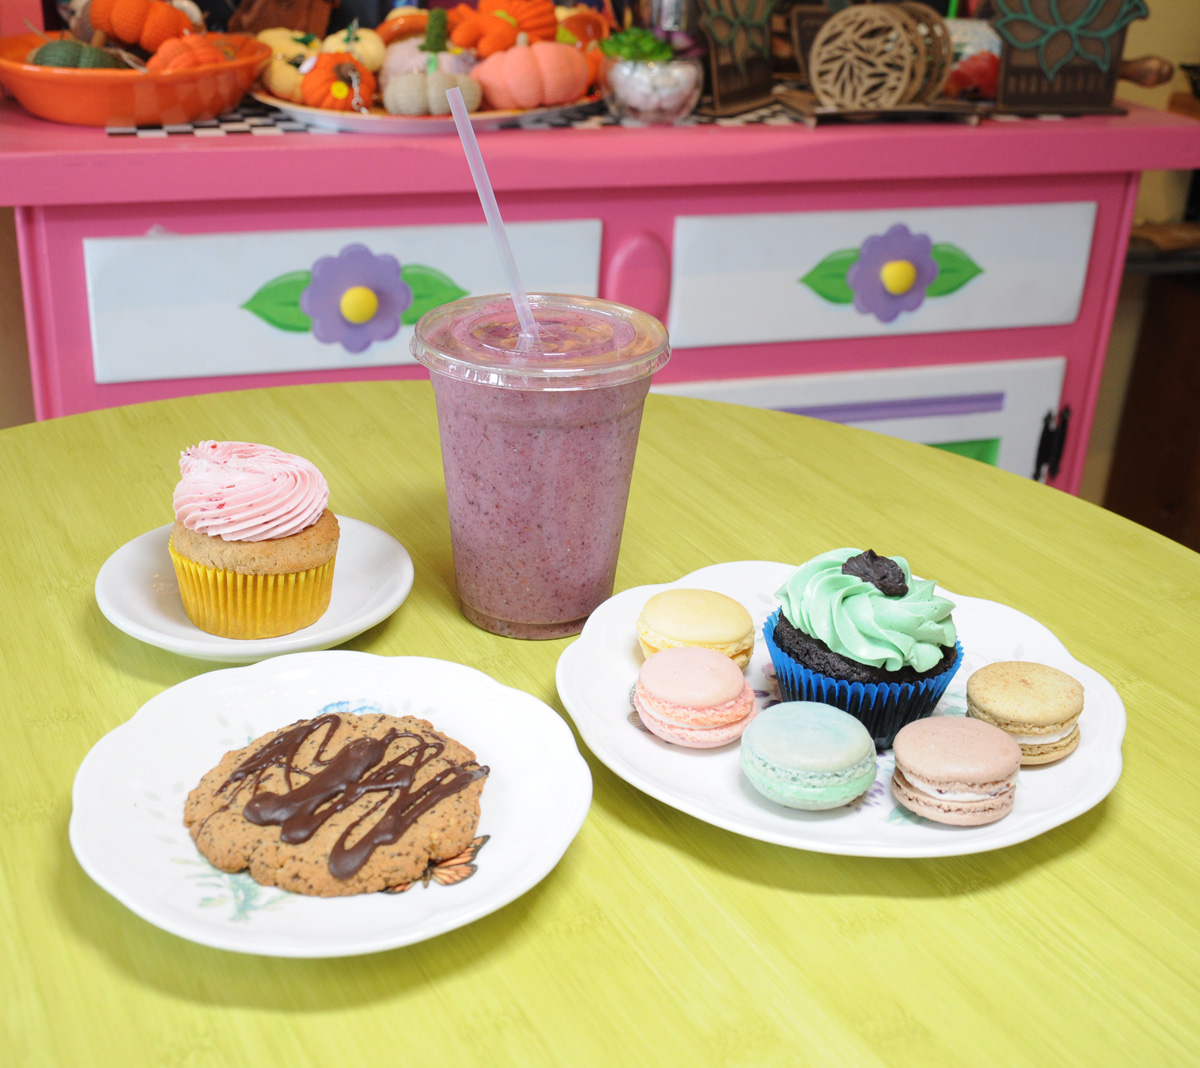 Delicious treats and smoothies available at Karen's Gluten Free Bakeshop in West Sedona